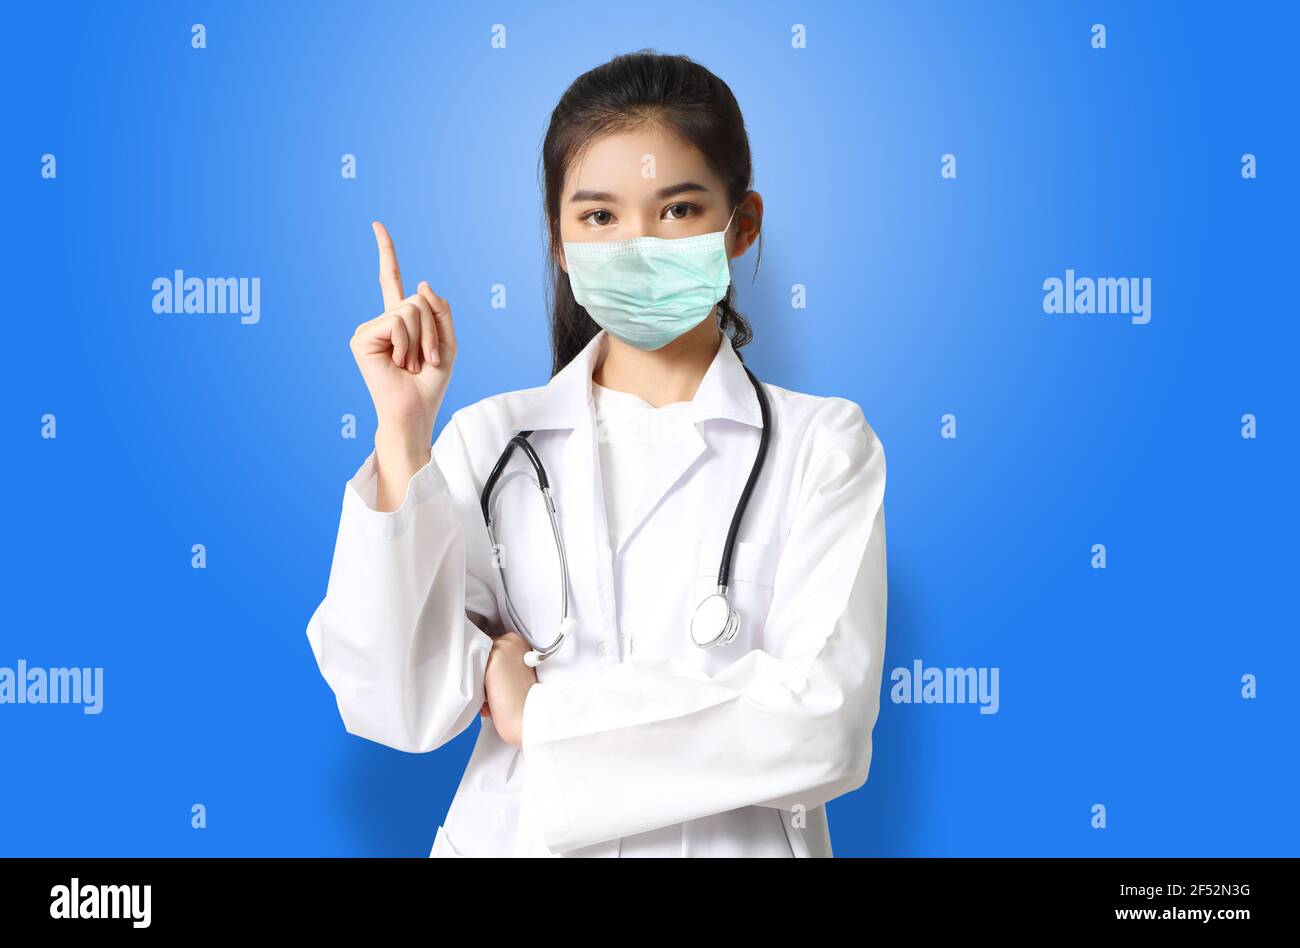 asian woman doctor in white uniform with mask Stock Photo